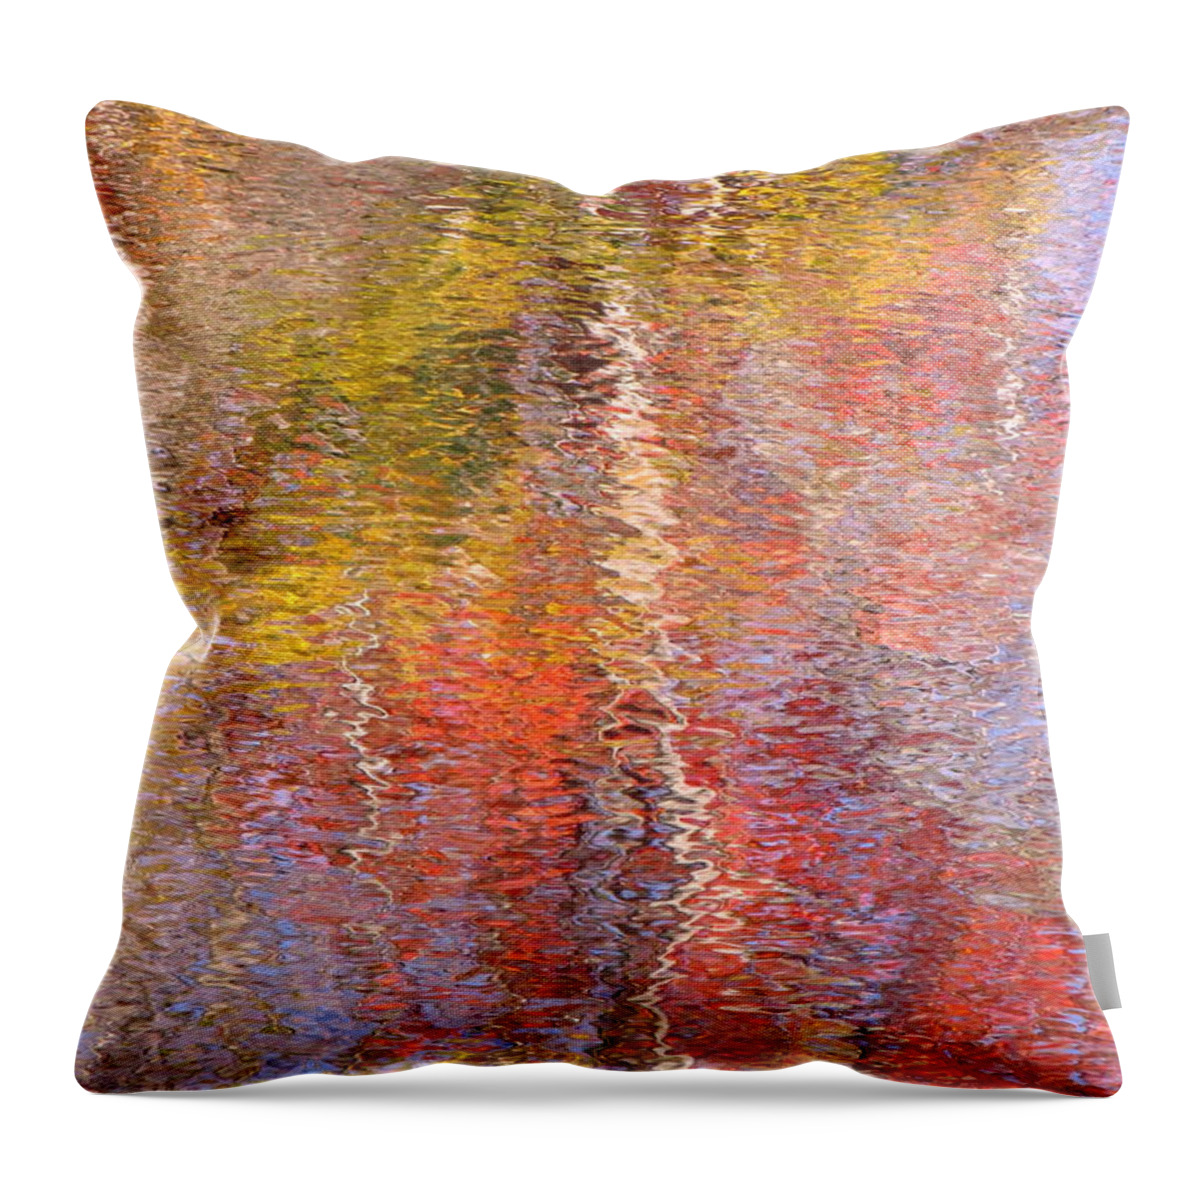 Abstract Throw Pillow featuring the photograph Life Is But A Dream by Sybil Staples